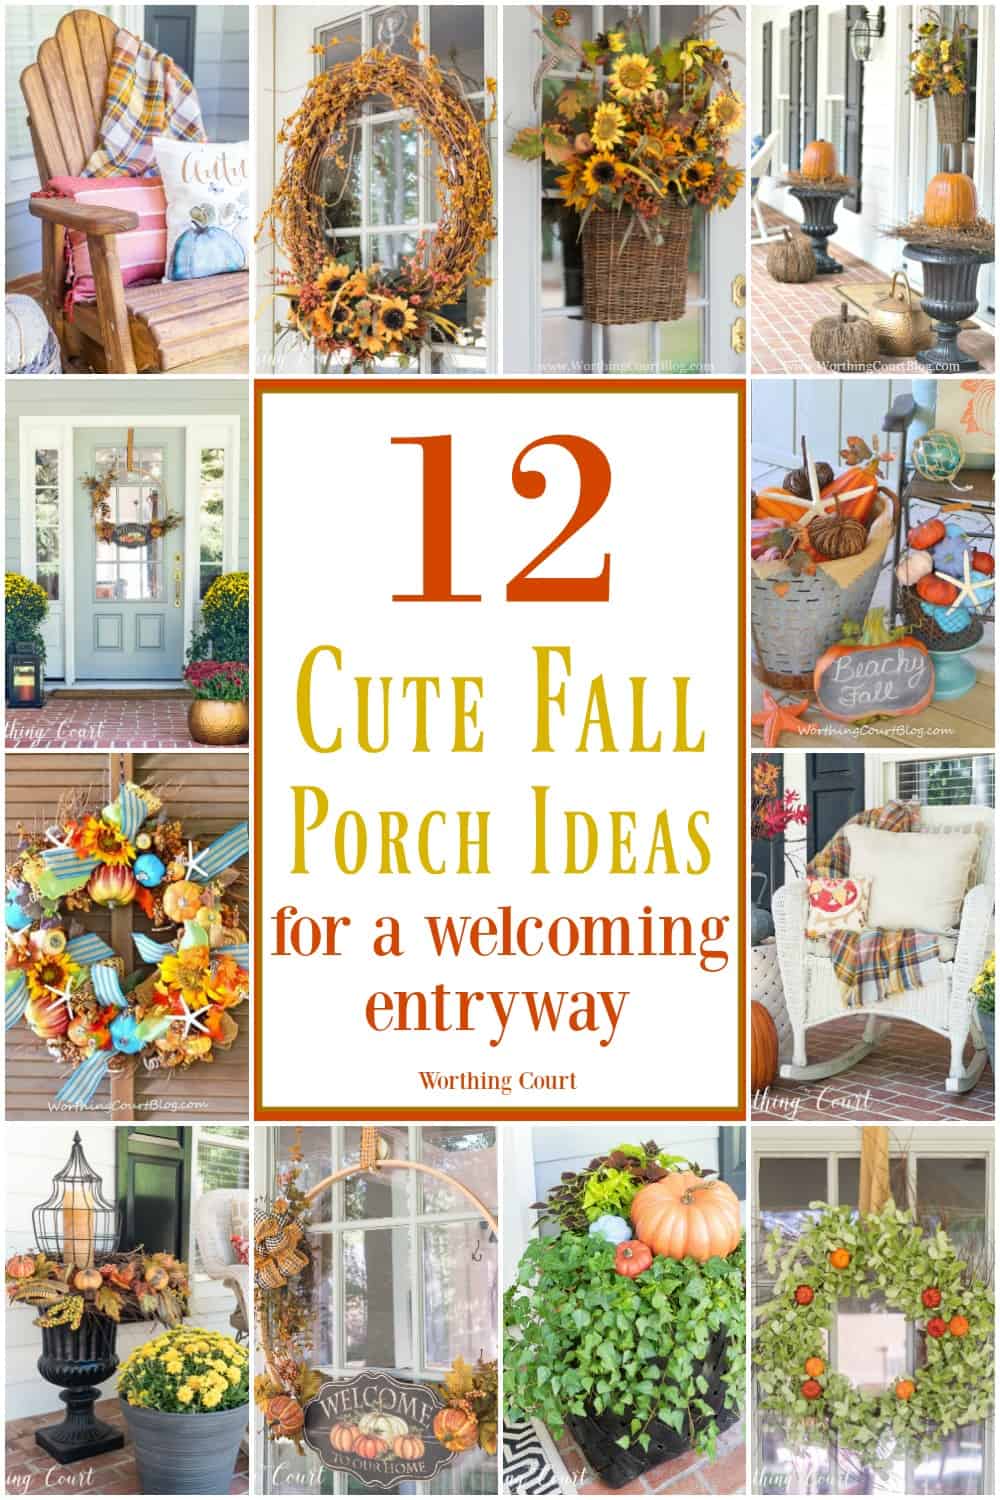 12 Cute Fall Porch Ideas For A Welcoming Entryway.